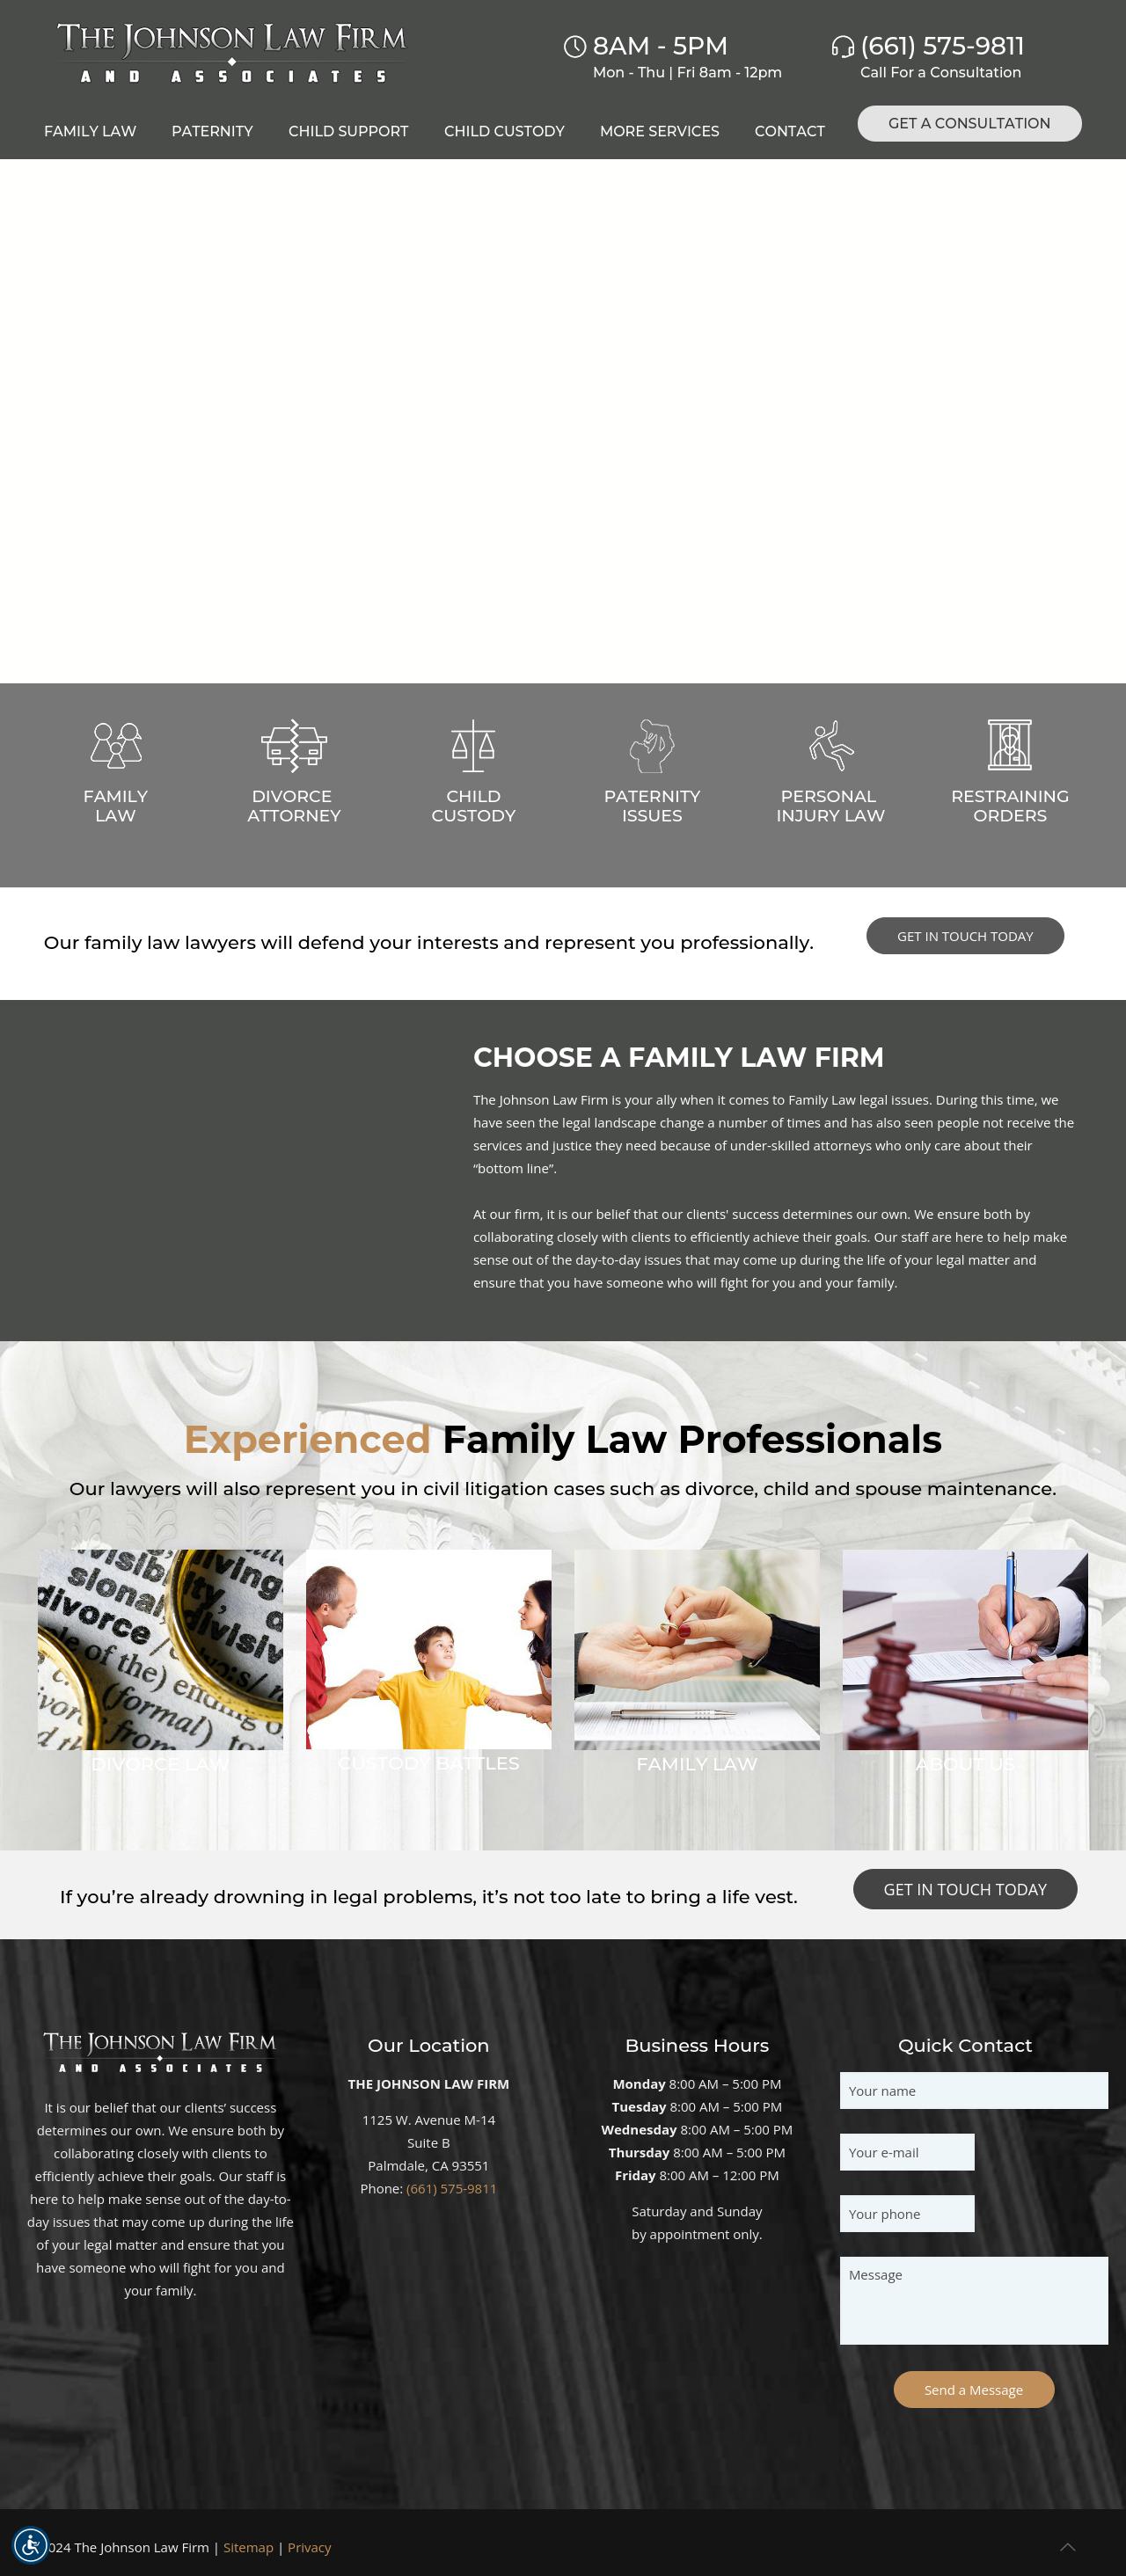 The Johnson Law Firm - Palmdale CA Lawyers